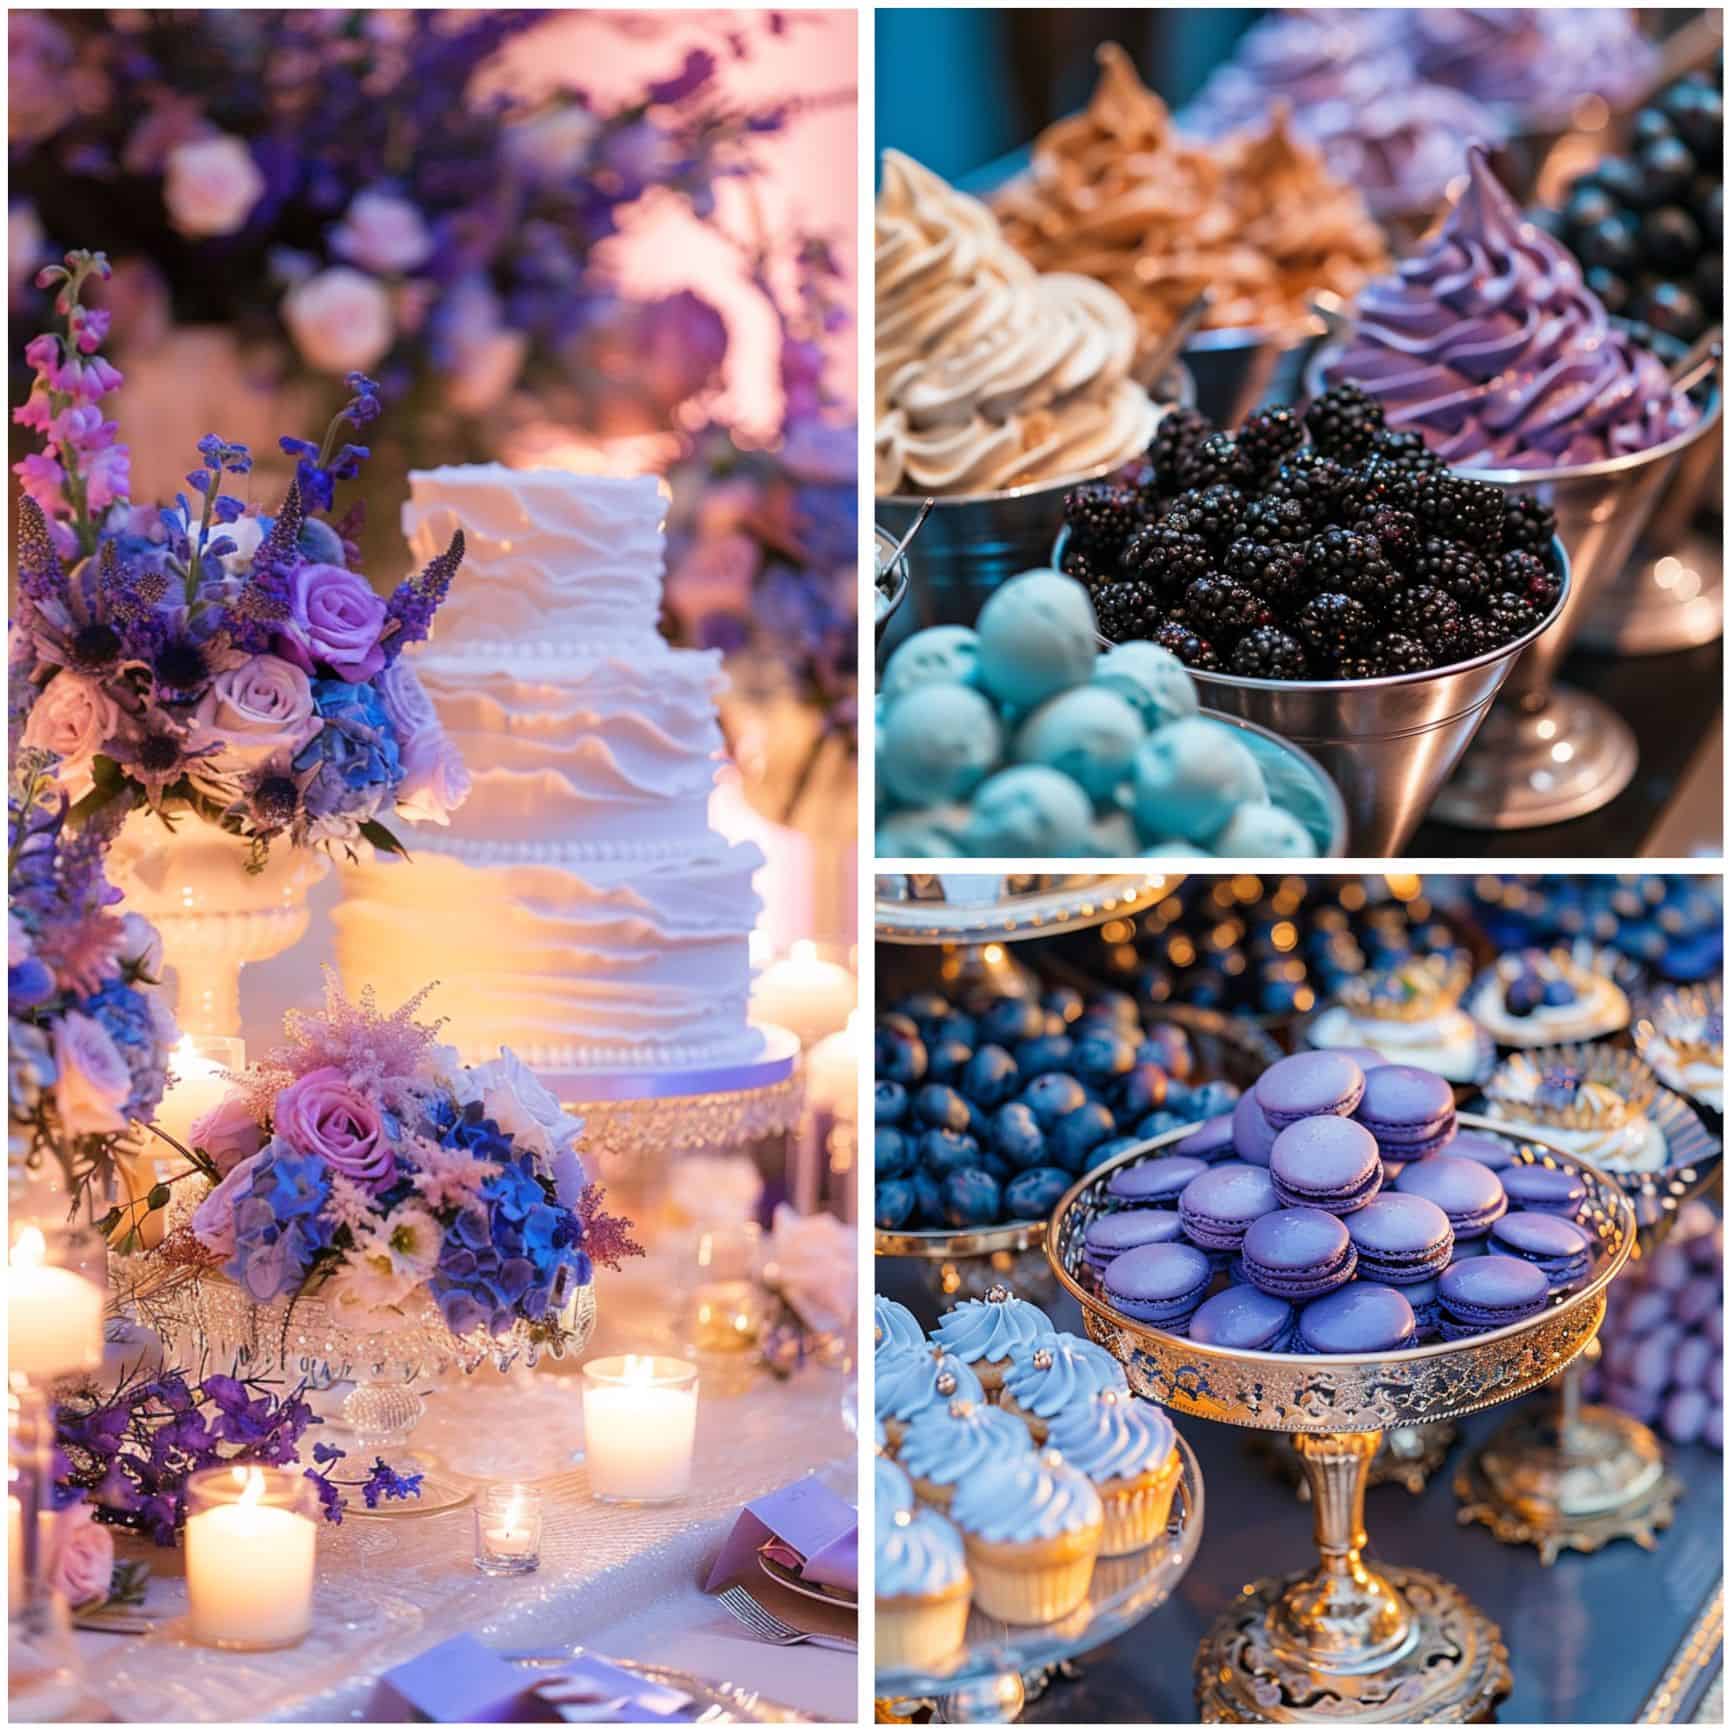 desserts for a blue and purple wedding